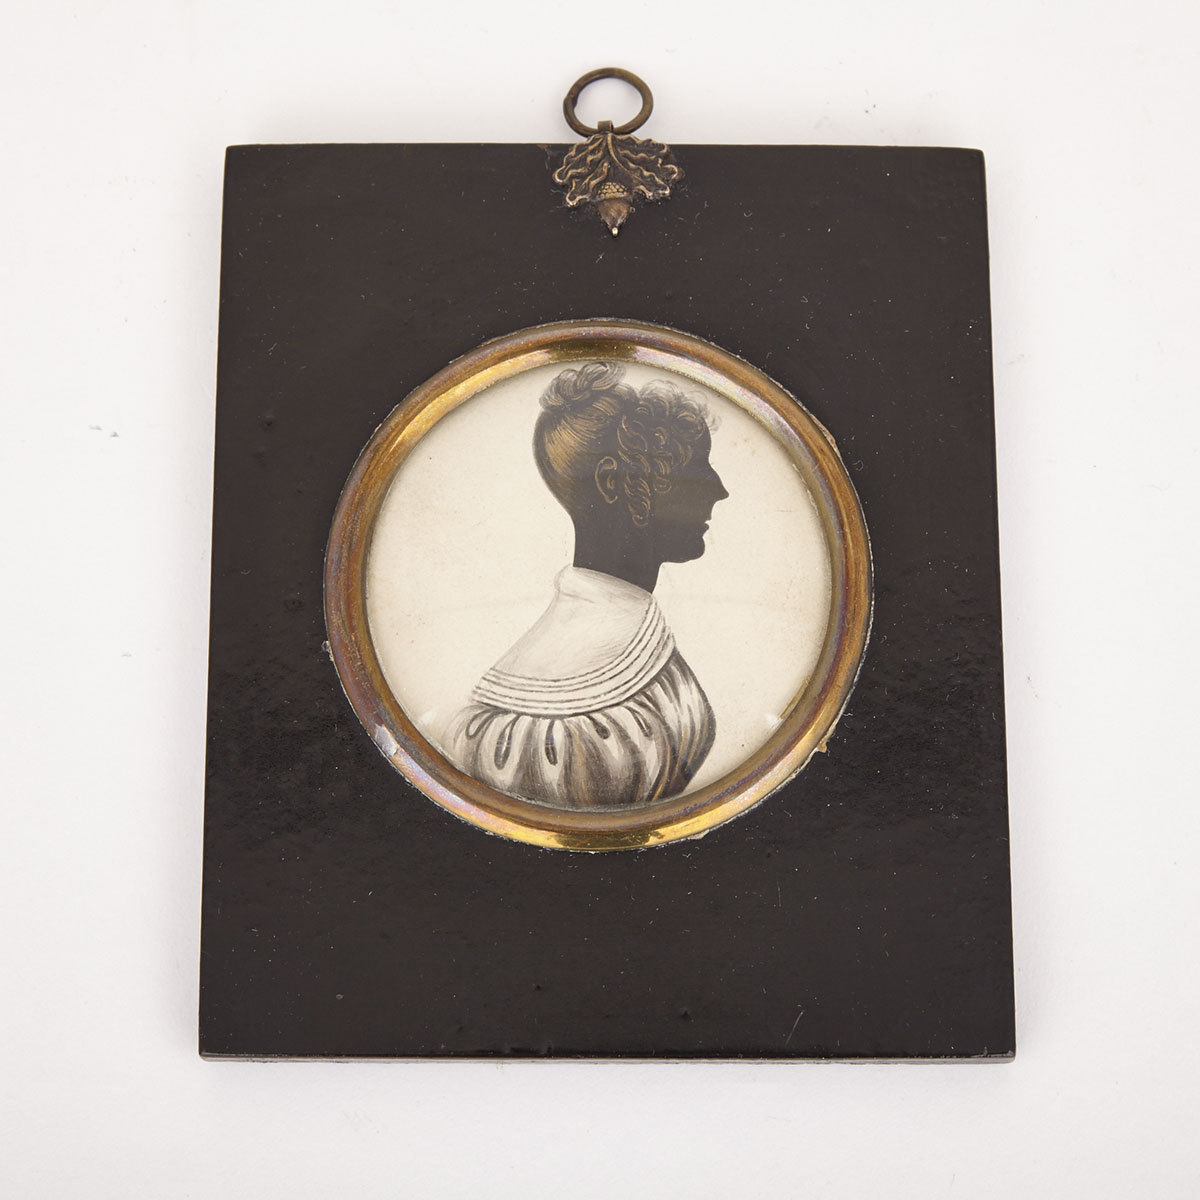 English School Portrait Miniature of a Young Woman, early 19th century